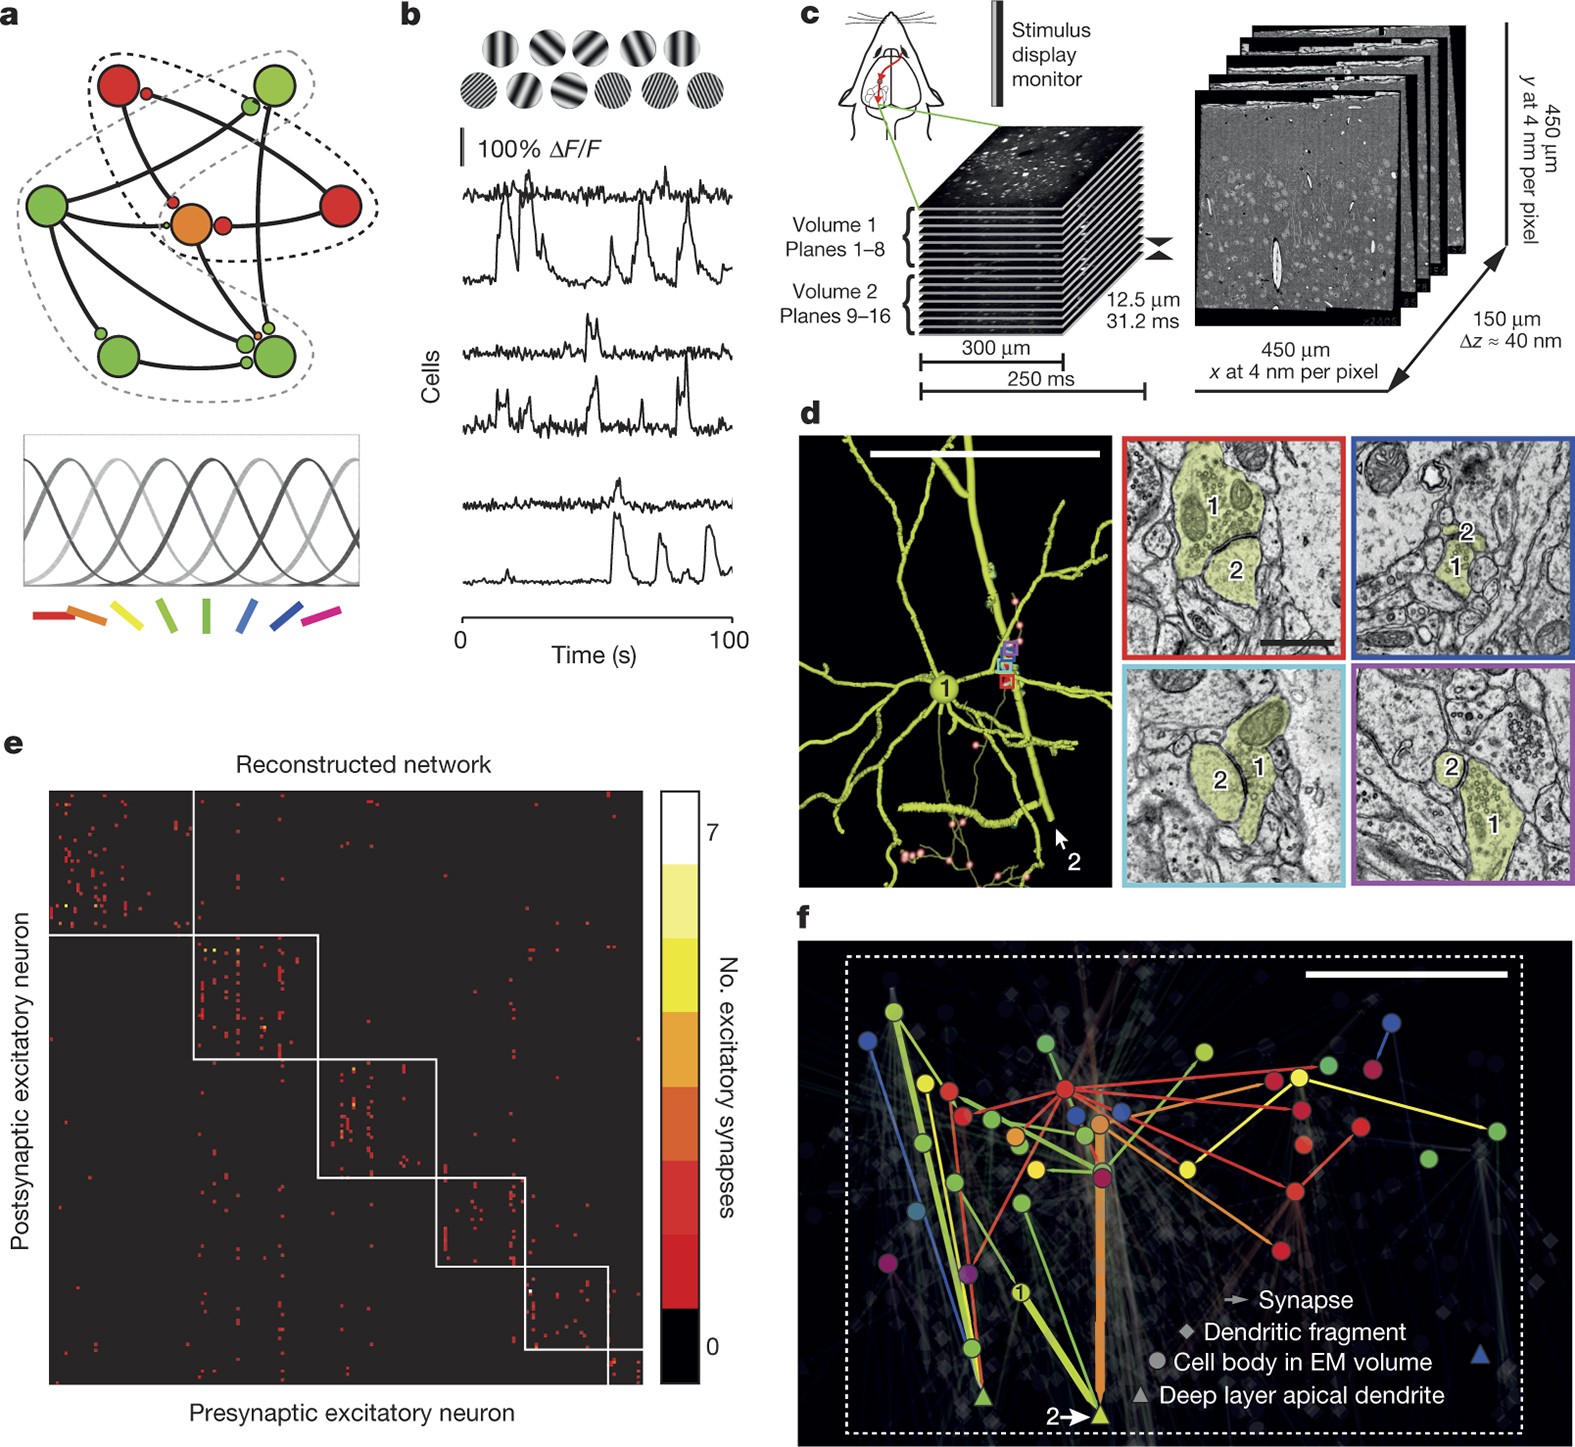 Anatomy And Function Of An Excitatory Network In The Visual Cortex